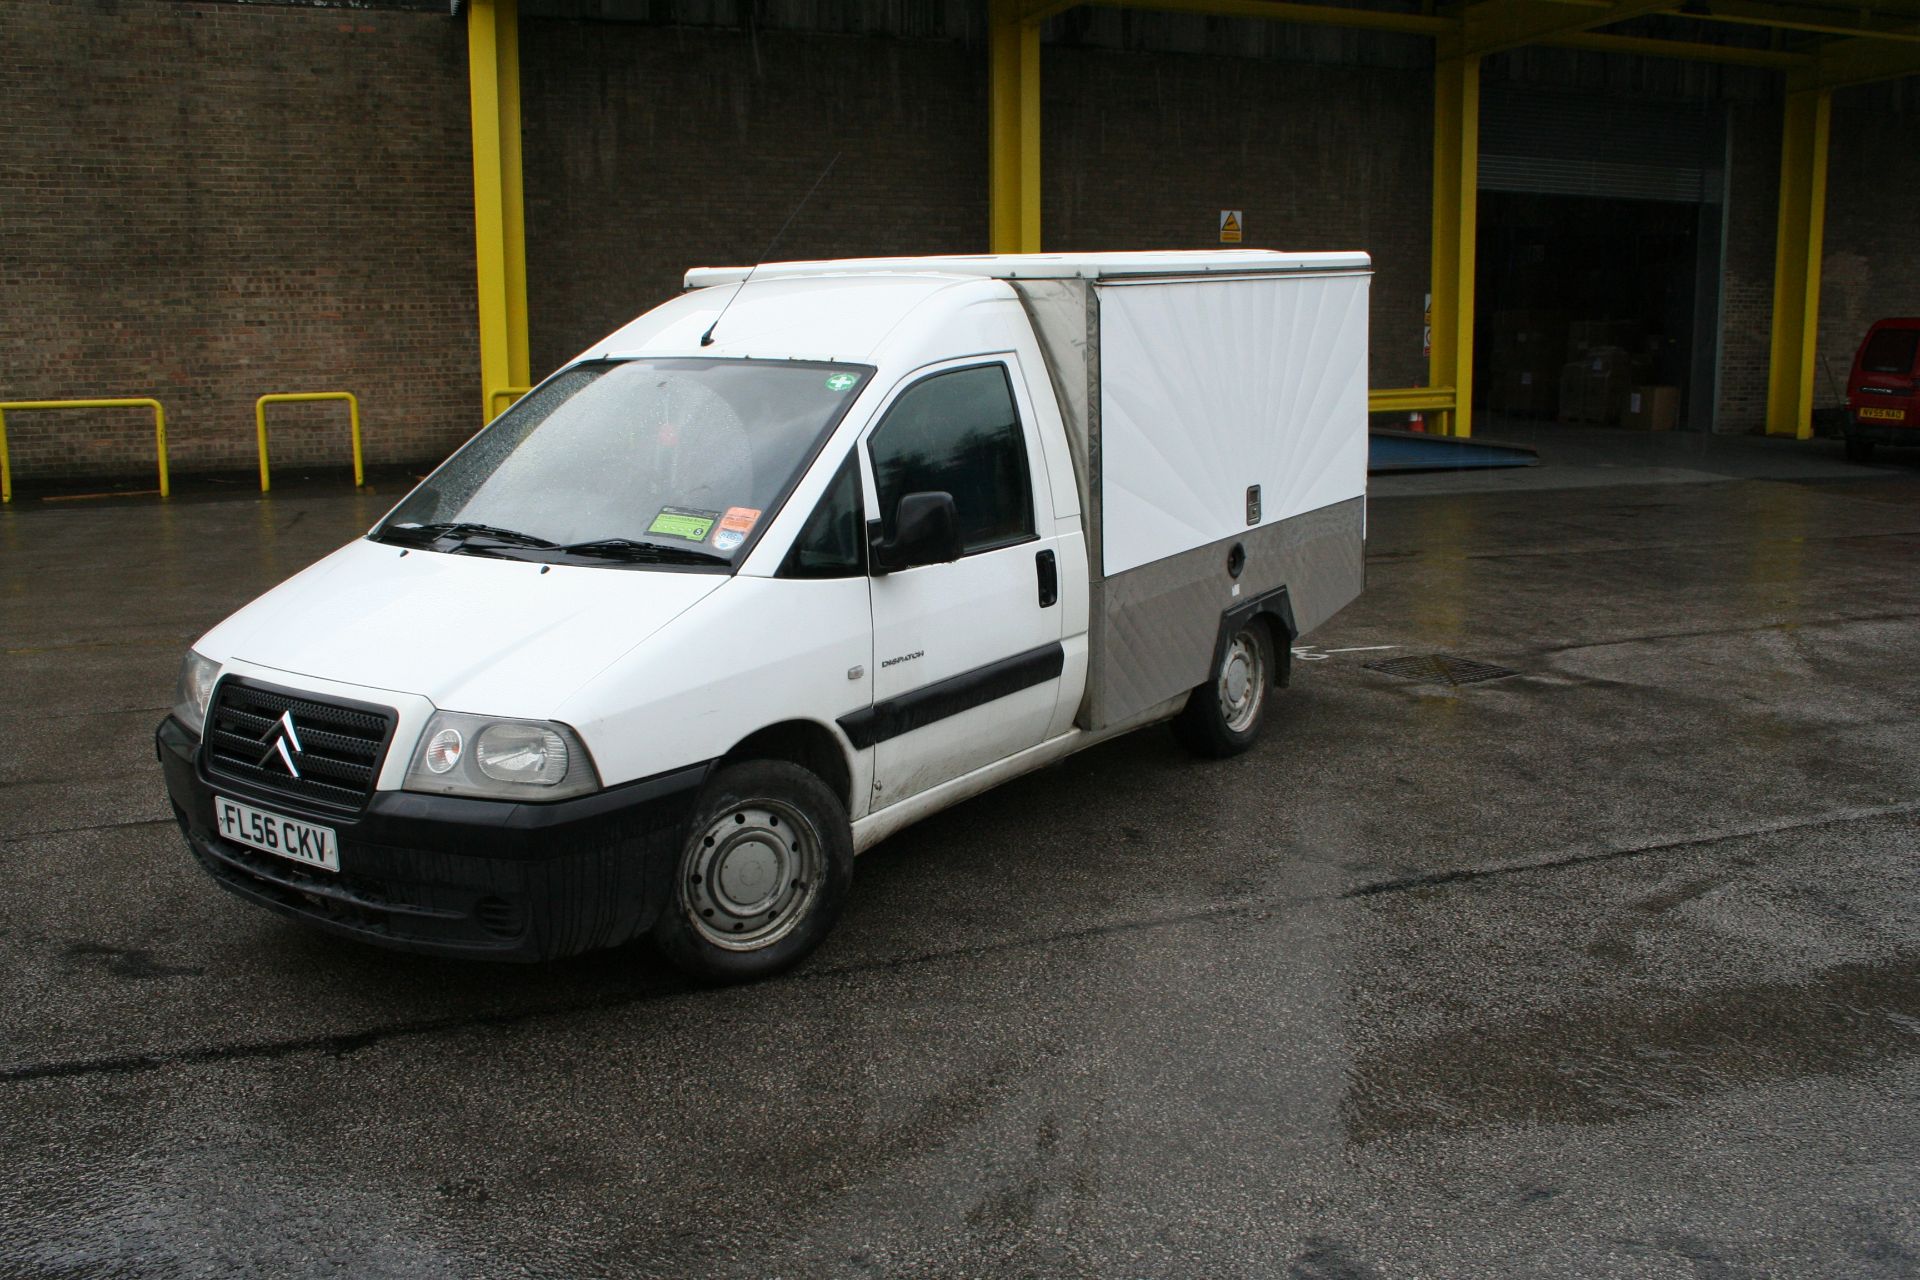 Jiffy Panino  mobile catering van based on Citroen Despatch 900 Ddi SWB chassis, registration number - Image 2 of 9